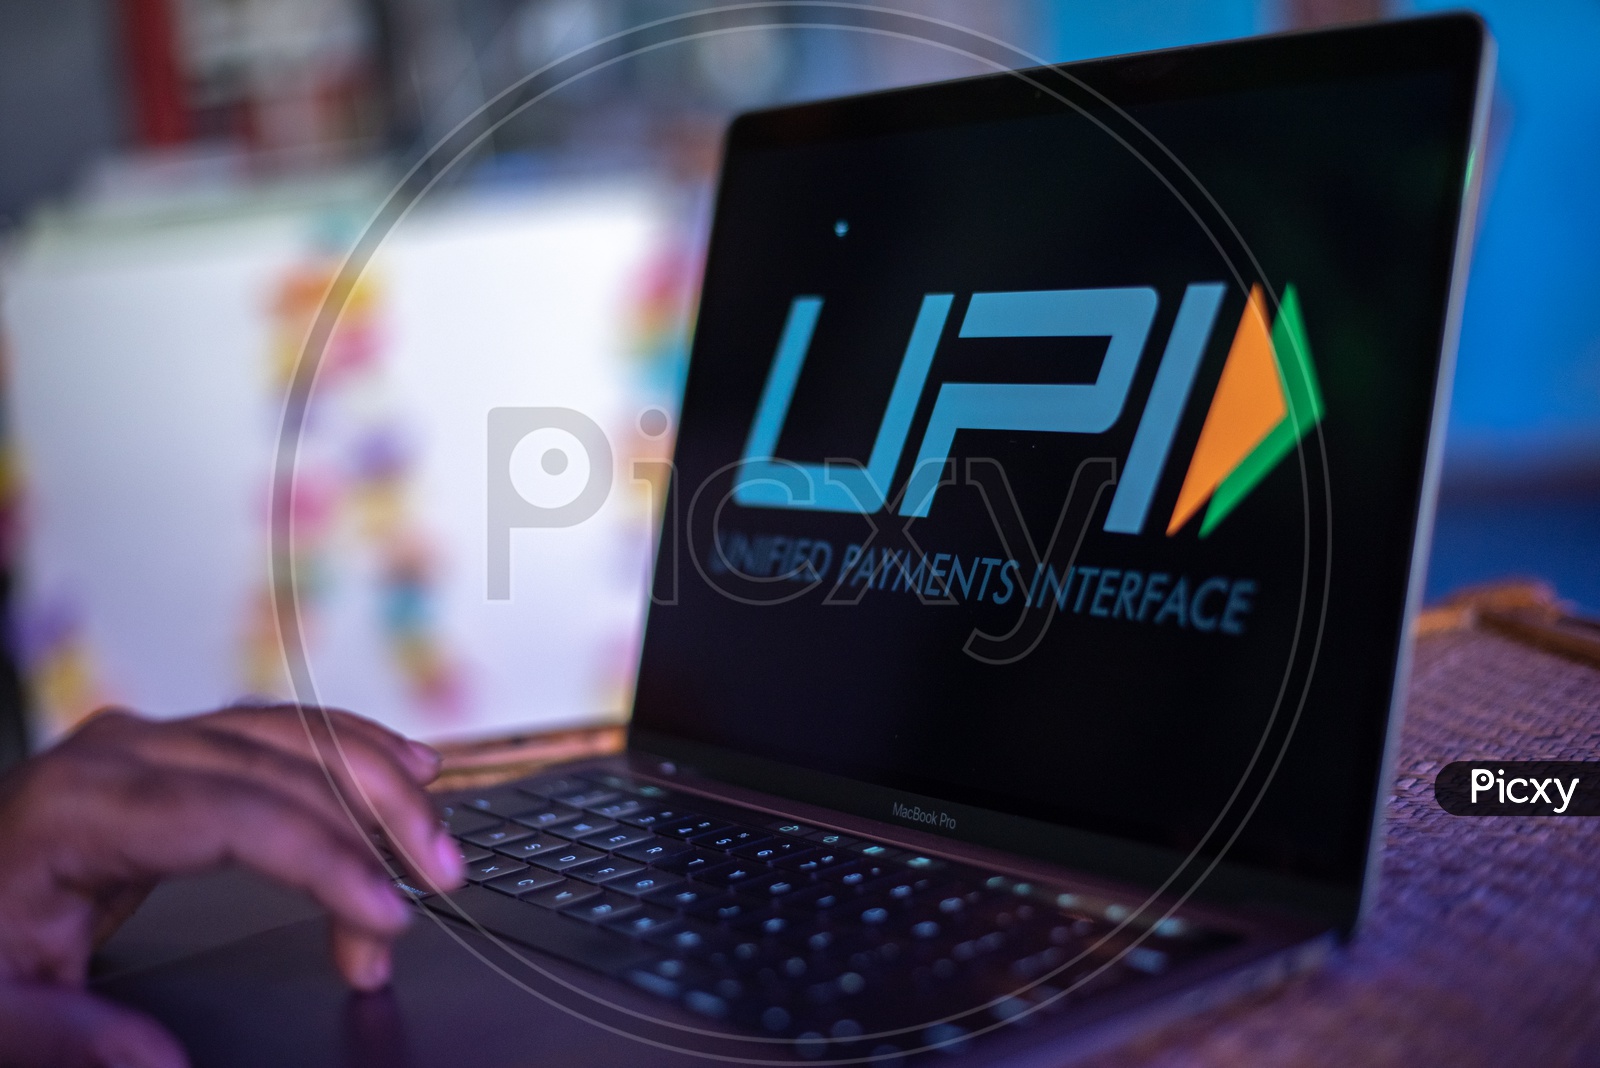 Indian Youth Accessing Unified Payment Interface ( UPI )  in Laptop